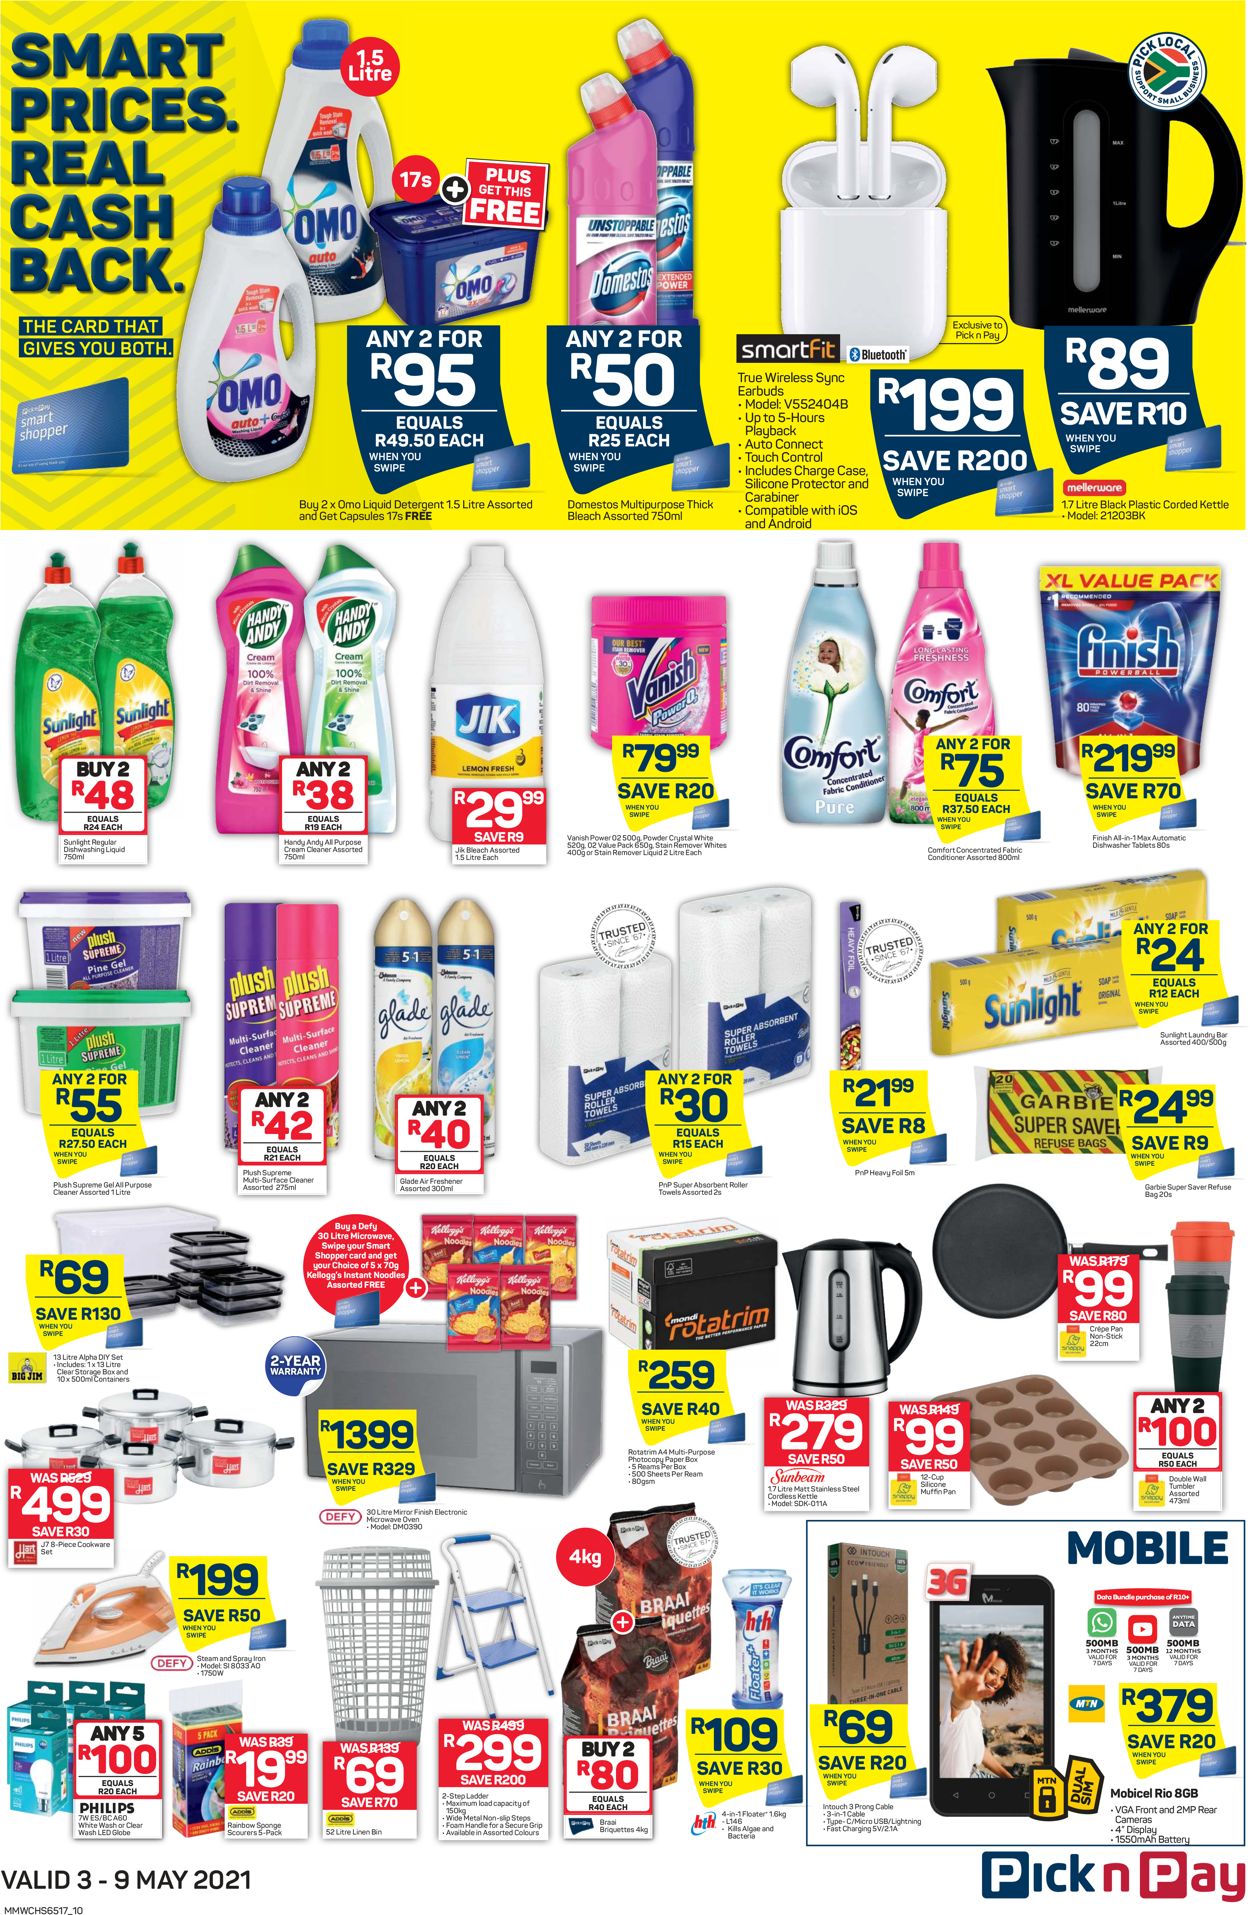 Pick n Pay Catalogue - 2021/05/03-2021/05/09 (Page 10)